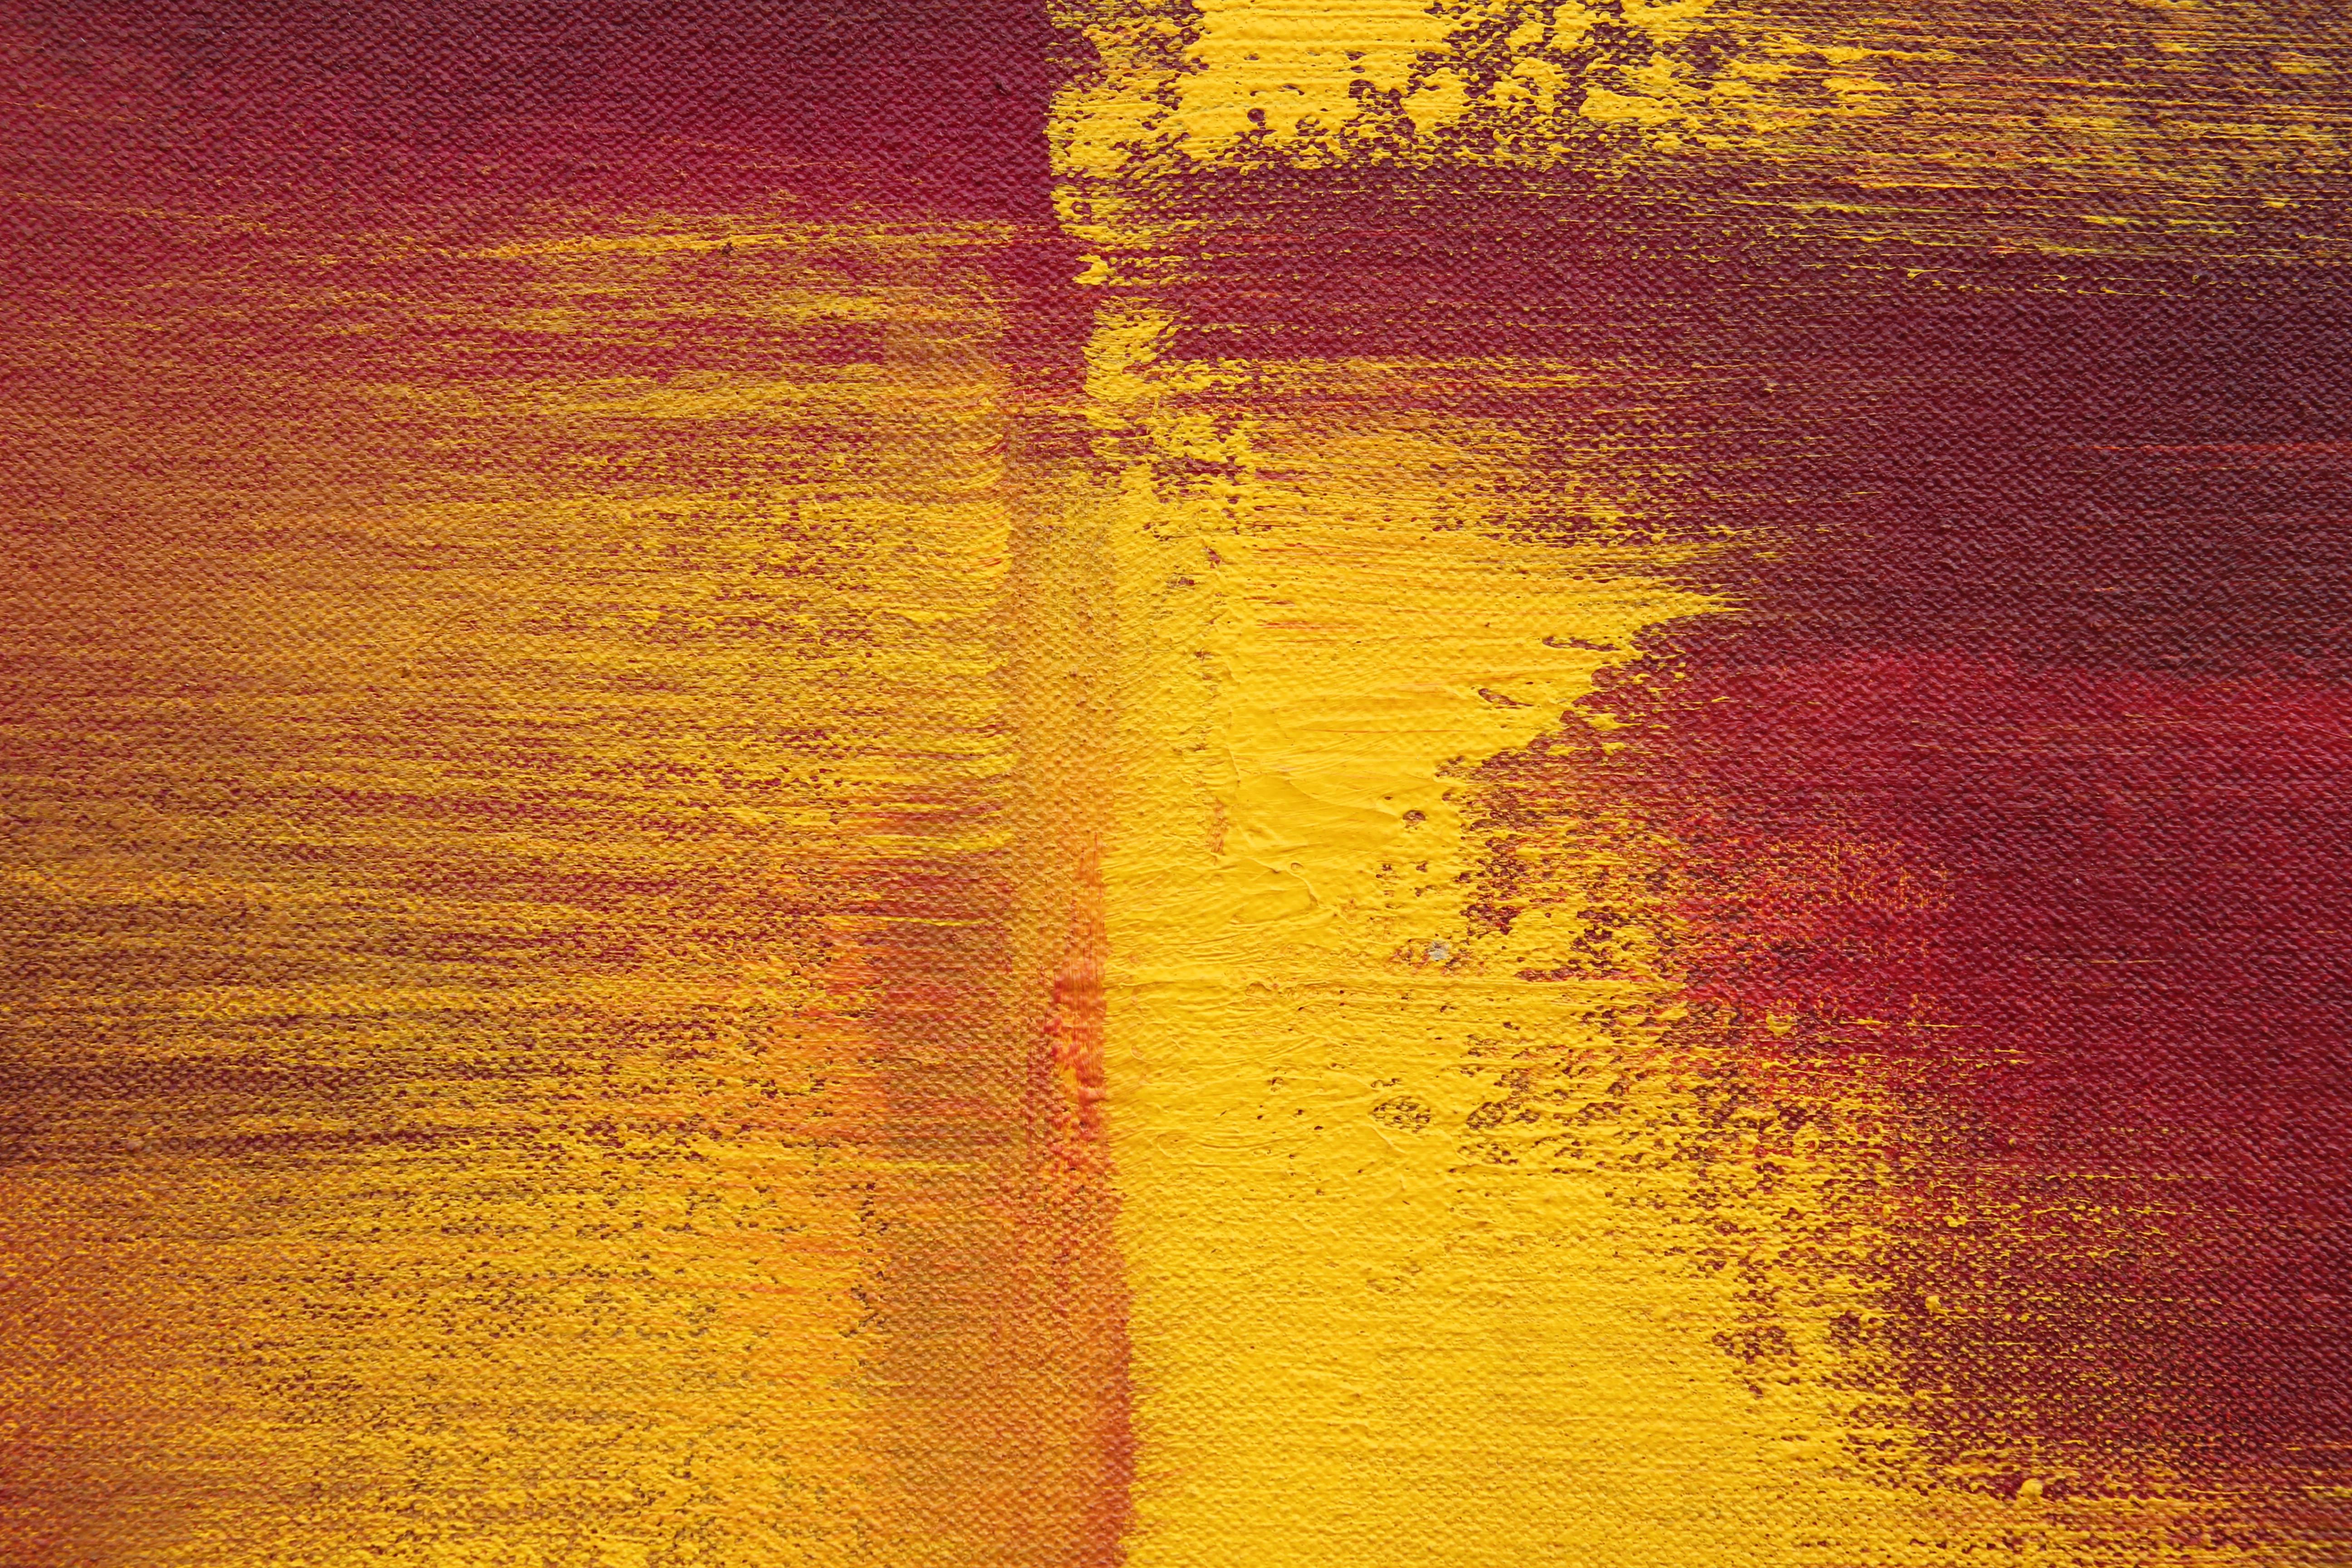 “Unexpected Pleasures” Red and Yellow Abstract Expressionist Painting For Sale 1